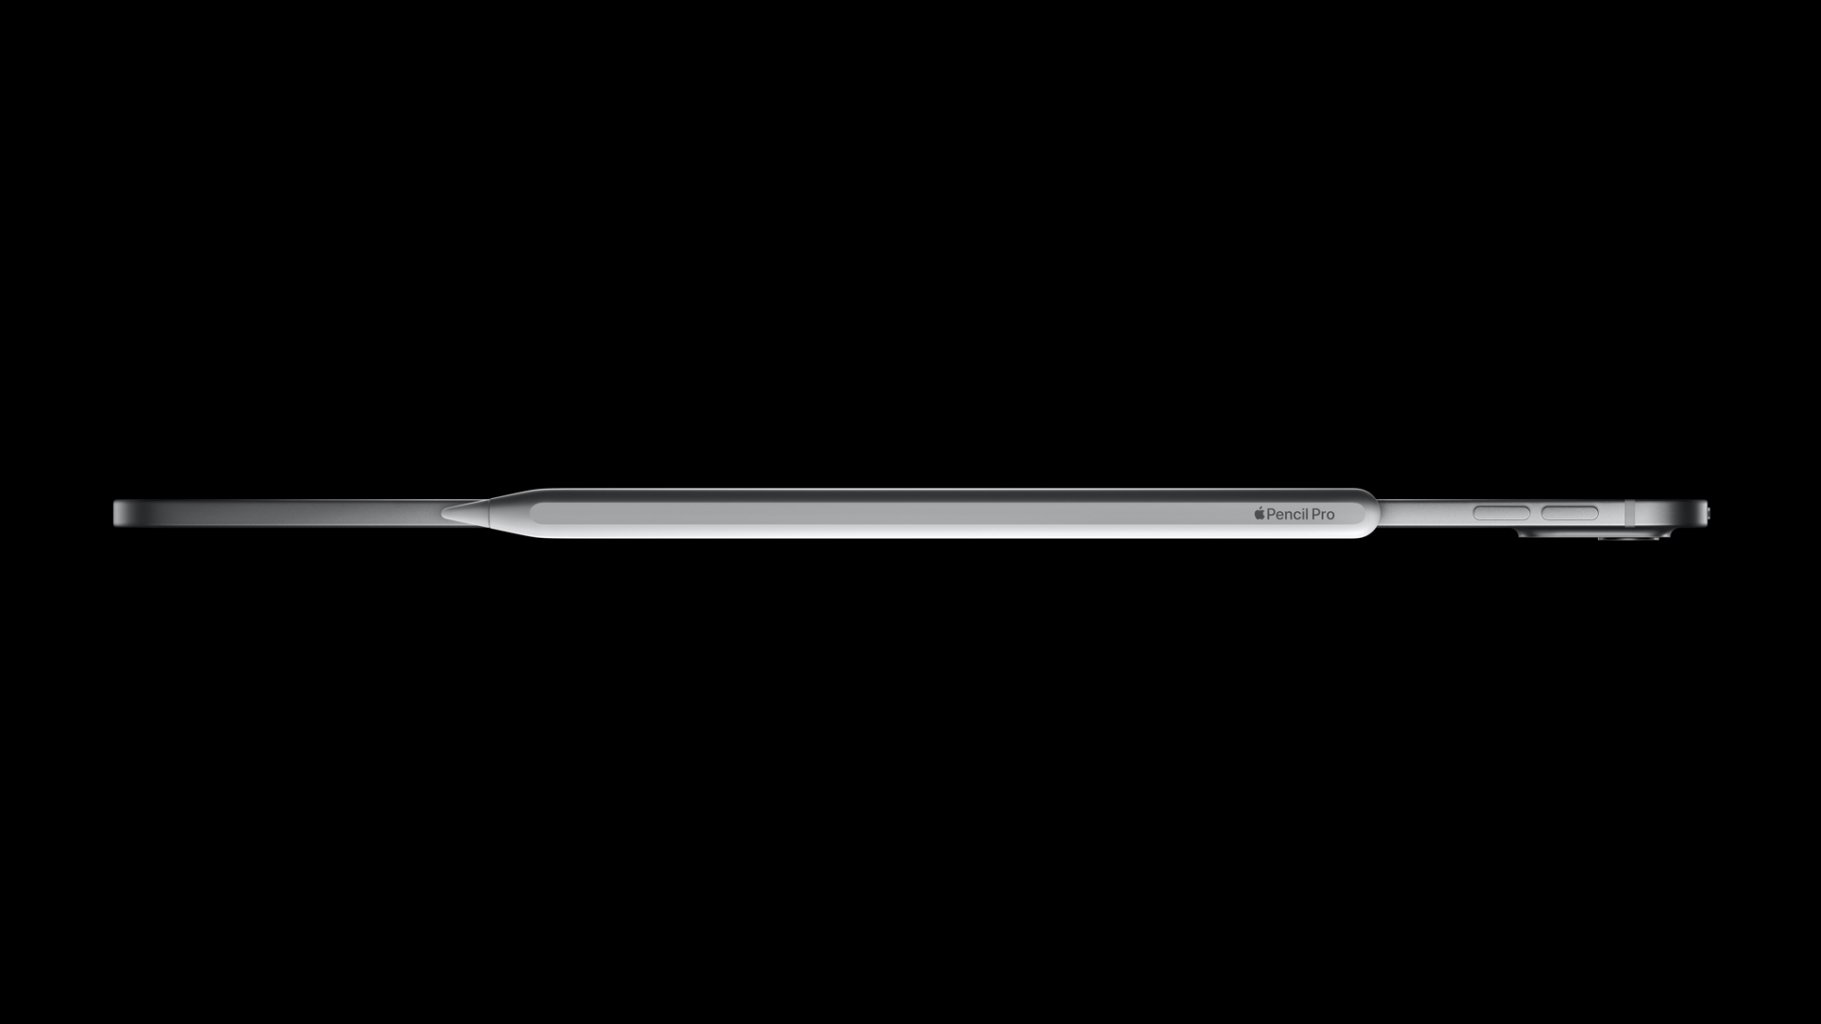 Photo 1 of Apple Pencil Pro – Bringing more magical capabilities to the iPad